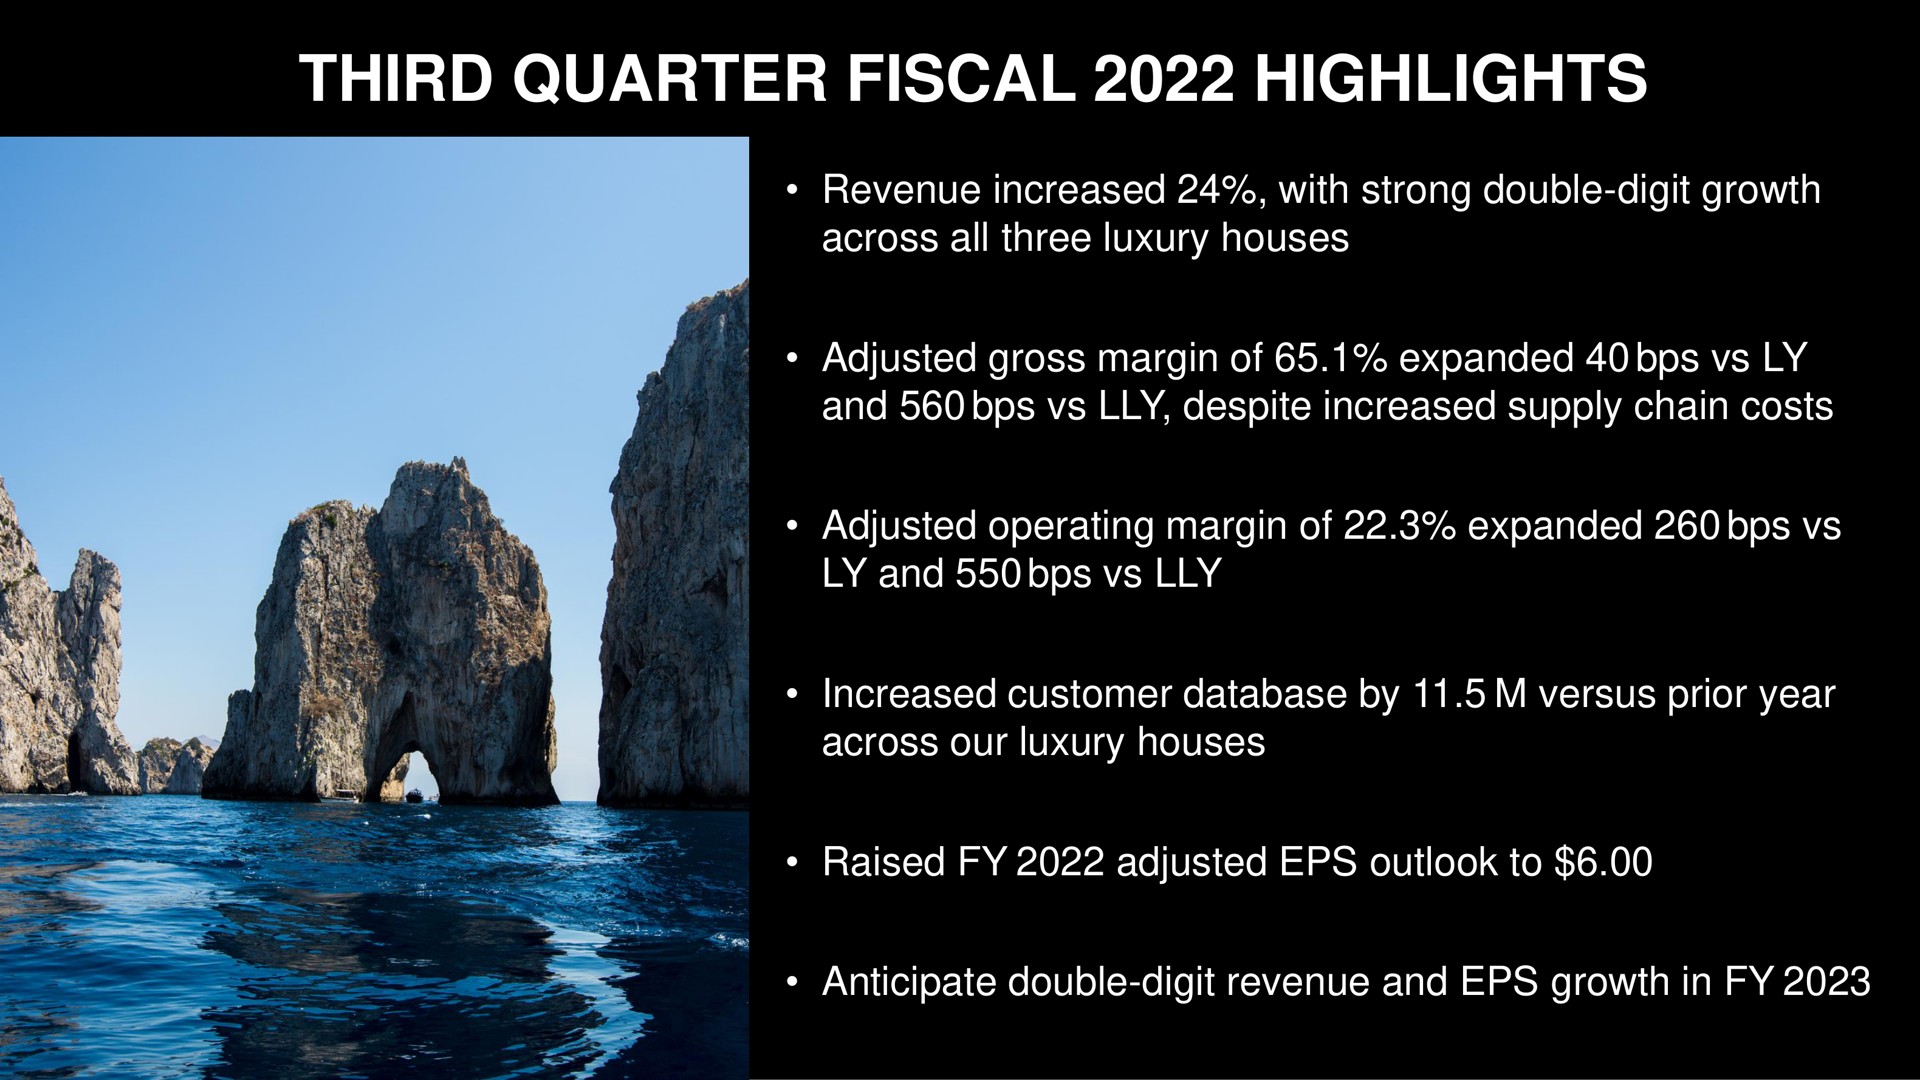 third quarter fiscal highlights revenue increased with strong double digit growth across all three luxury houses adjusted gross margin of expanded and despite increased supply chain costs adjusted operating margin of expanded and increased customer by versus prior year across our luxury houses raised adjusted outlook to anticipate double digit revenue and growth in | Capri Holdings